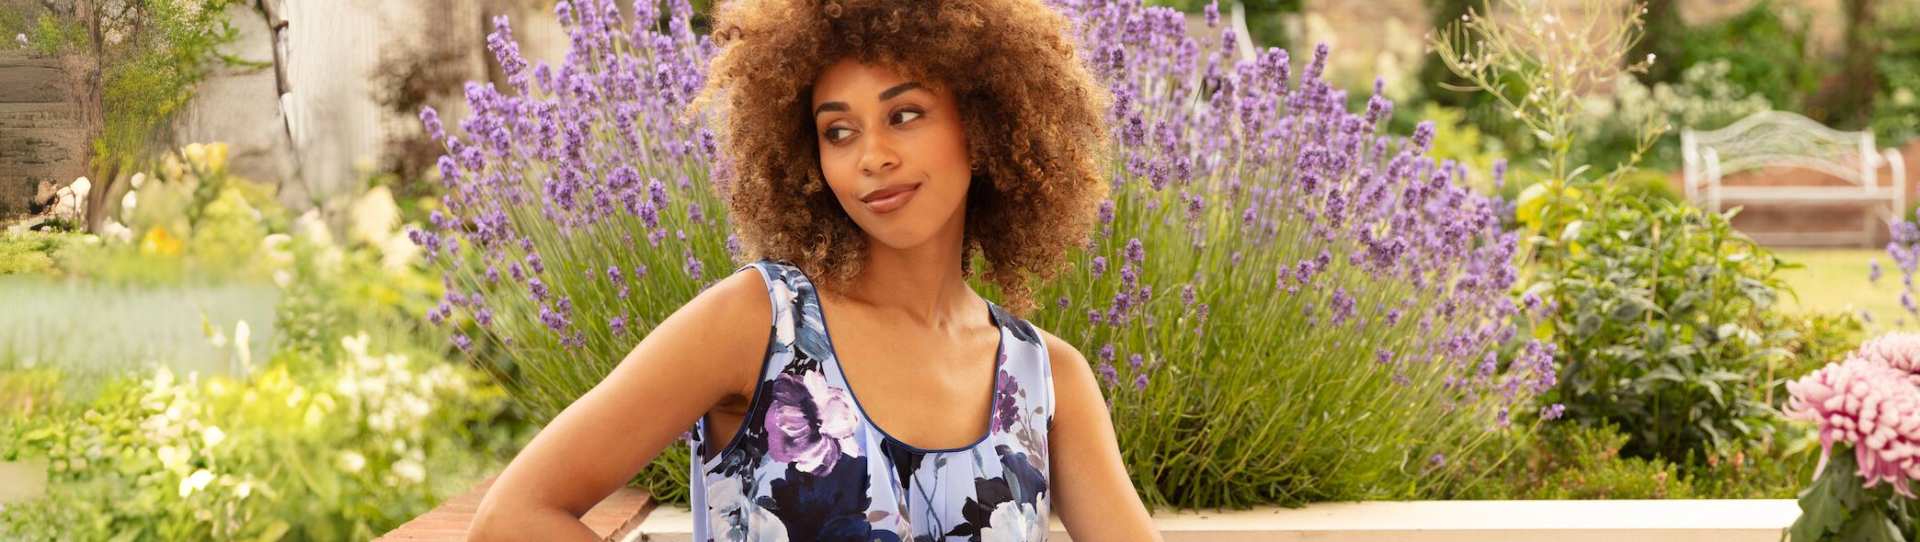 Floral-Inspired Fashion: A Loungewear Lookbook Inspired by the RHS Chelsea Flower Show